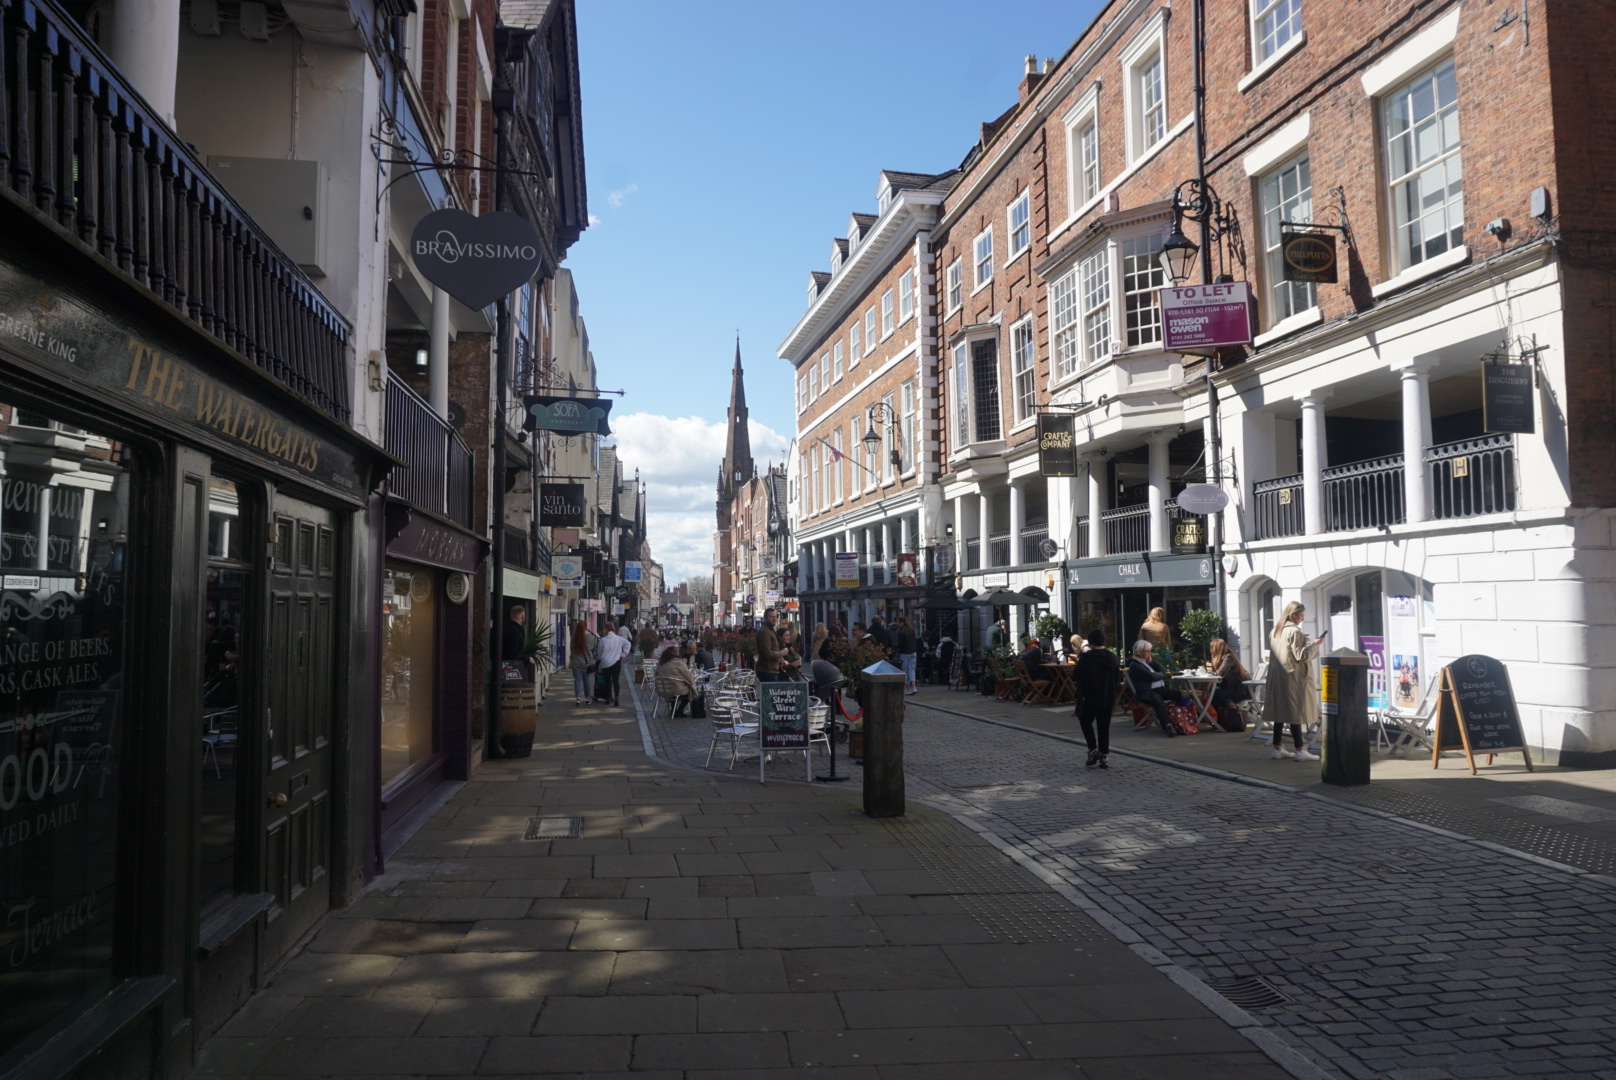 Watergate Street was busy as businesses reopened on Monday, April 12.